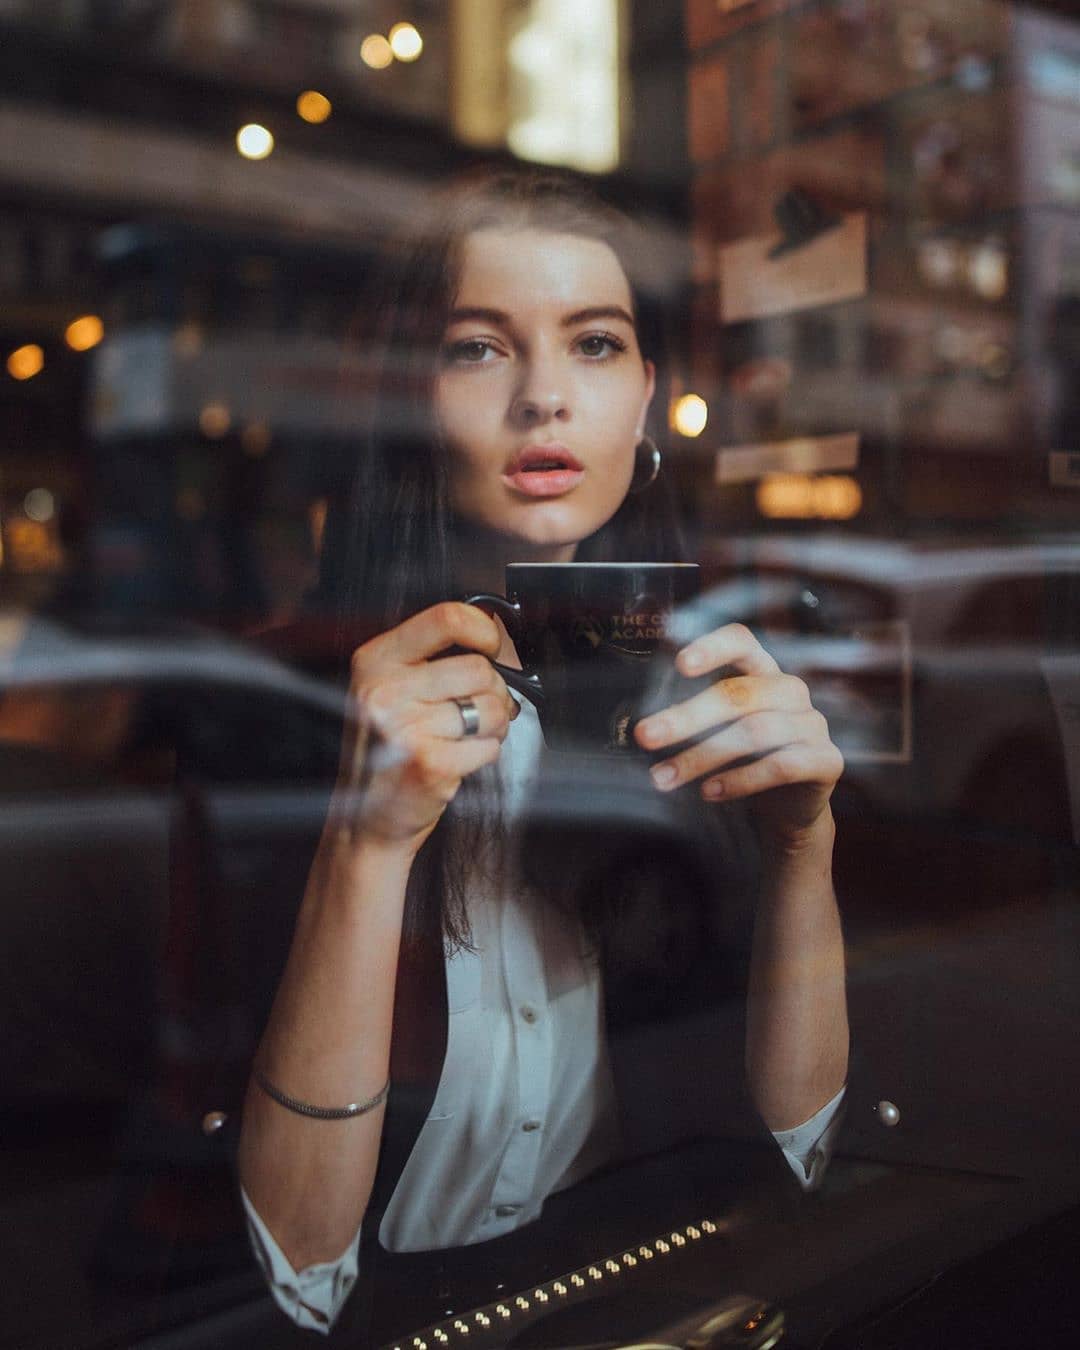 What's your go-to drink at The Coffee Academïcs? ☕ Thanks for visiting us @polina_shtern! We love this shot of you.  The Coffee Academïcs:...